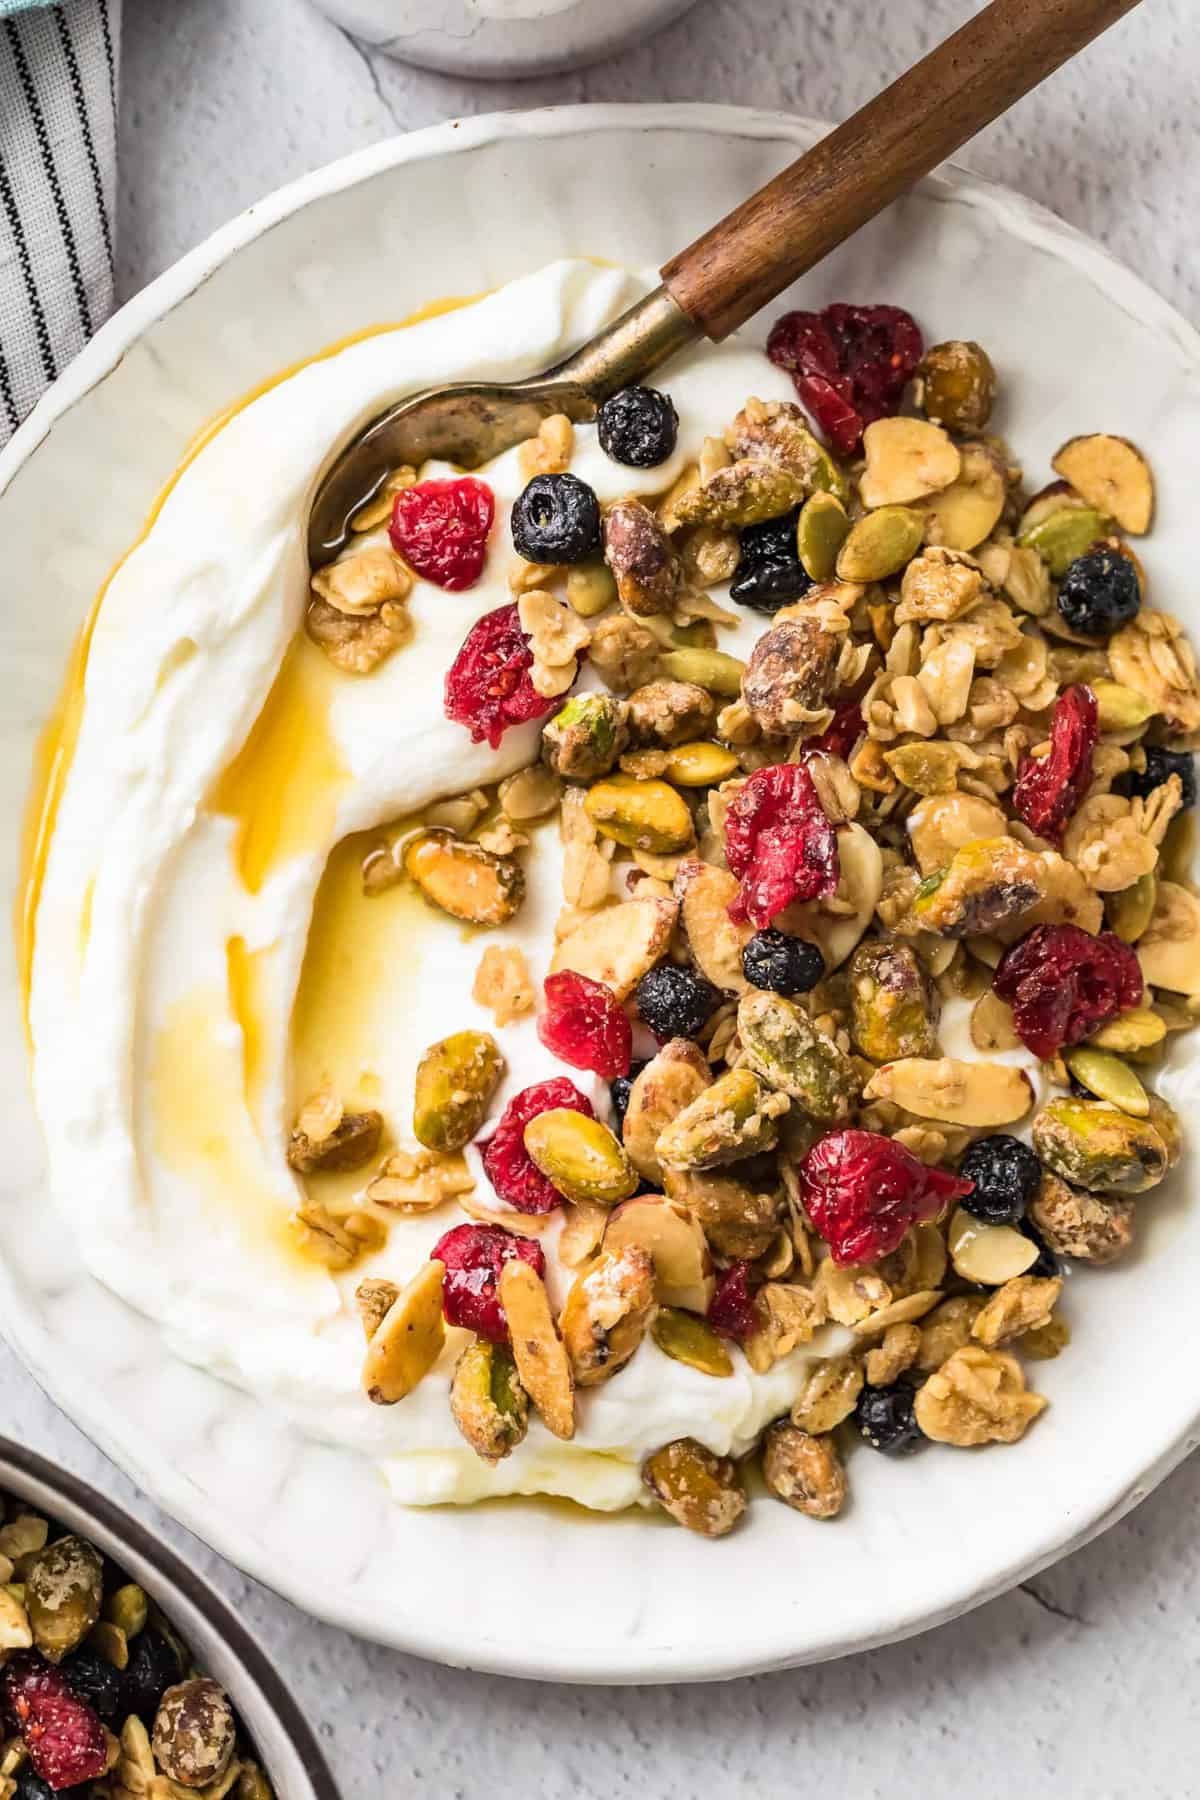 Baked maple syrup granola served with yogurt and maple syrup